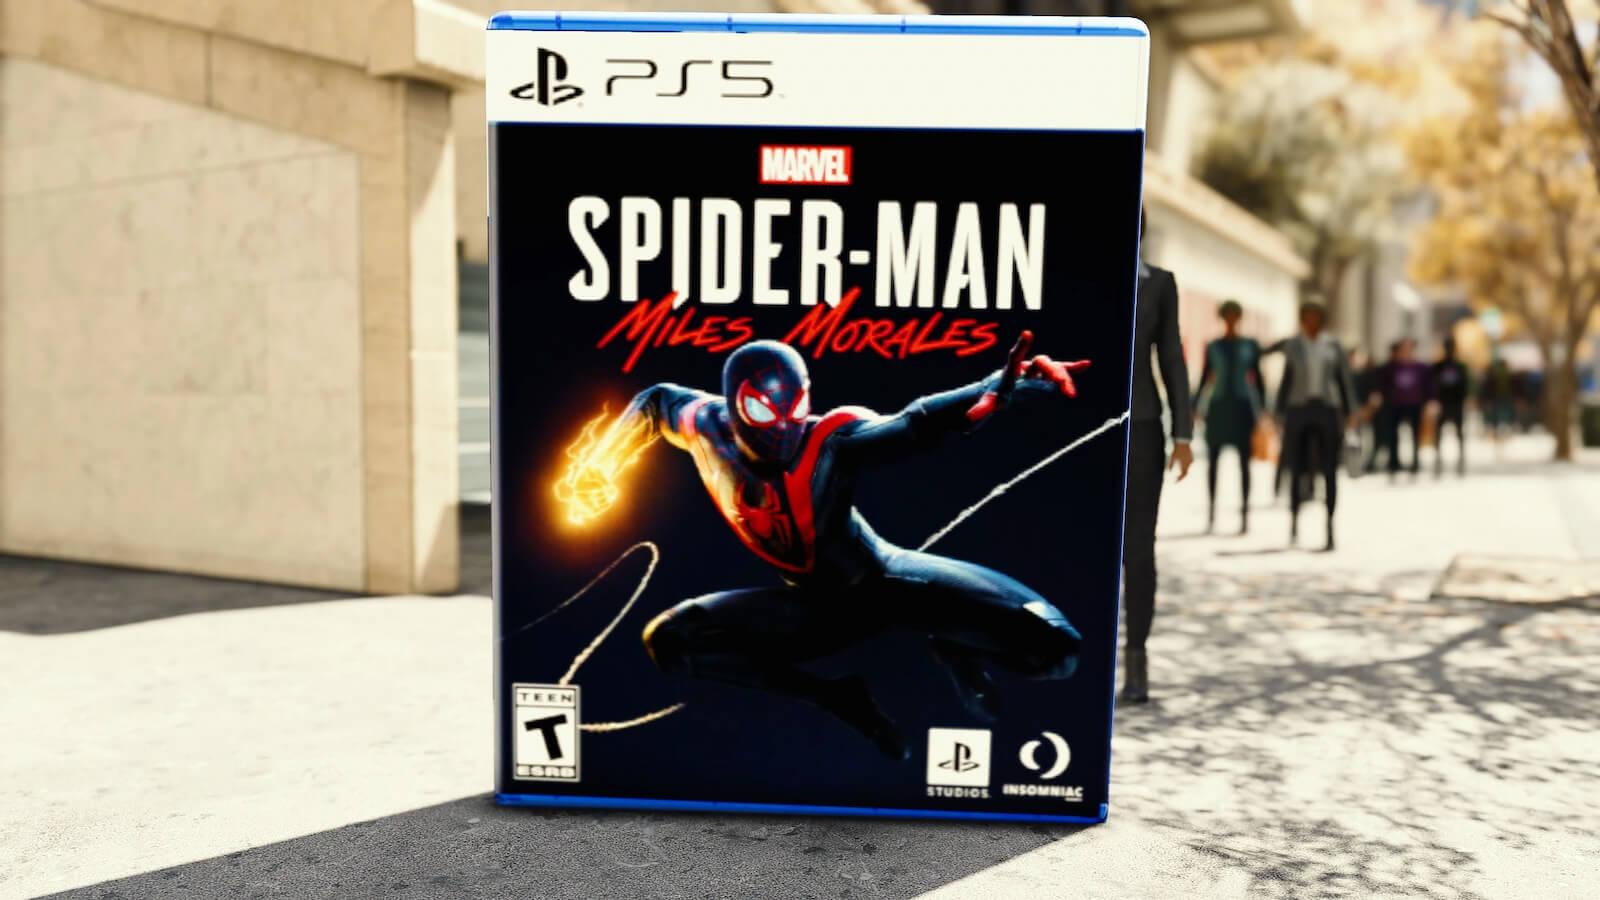 How to Achieve the Never Give up Trophy in Spider-Man: Miles Morales -  KeenGamer